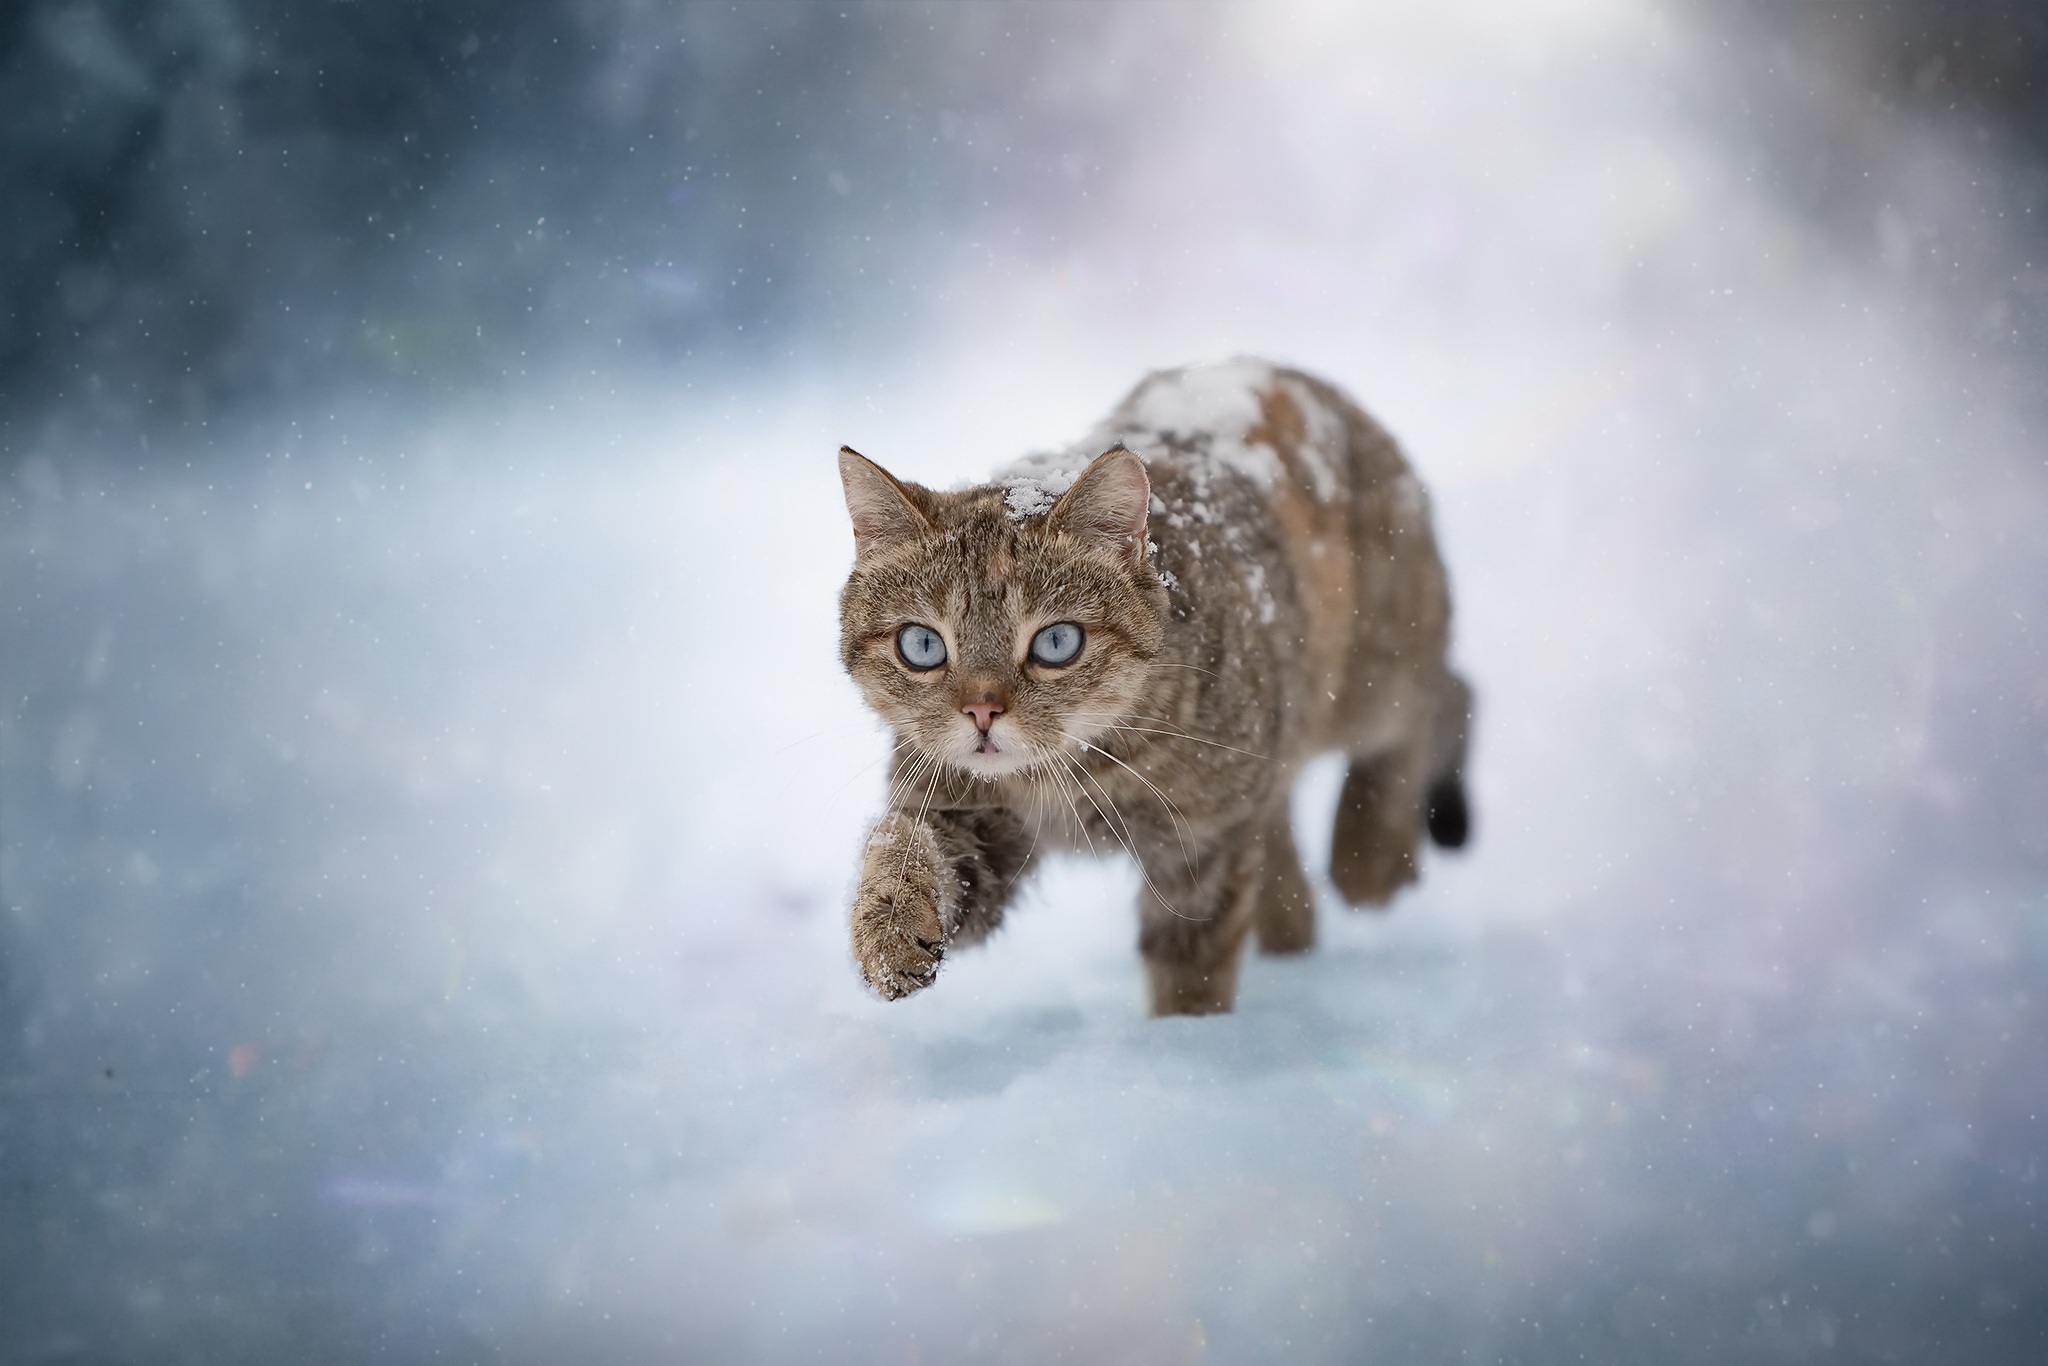 General 2048x1366 cats snow winter ice cold animals mammals blue eyes feline nature